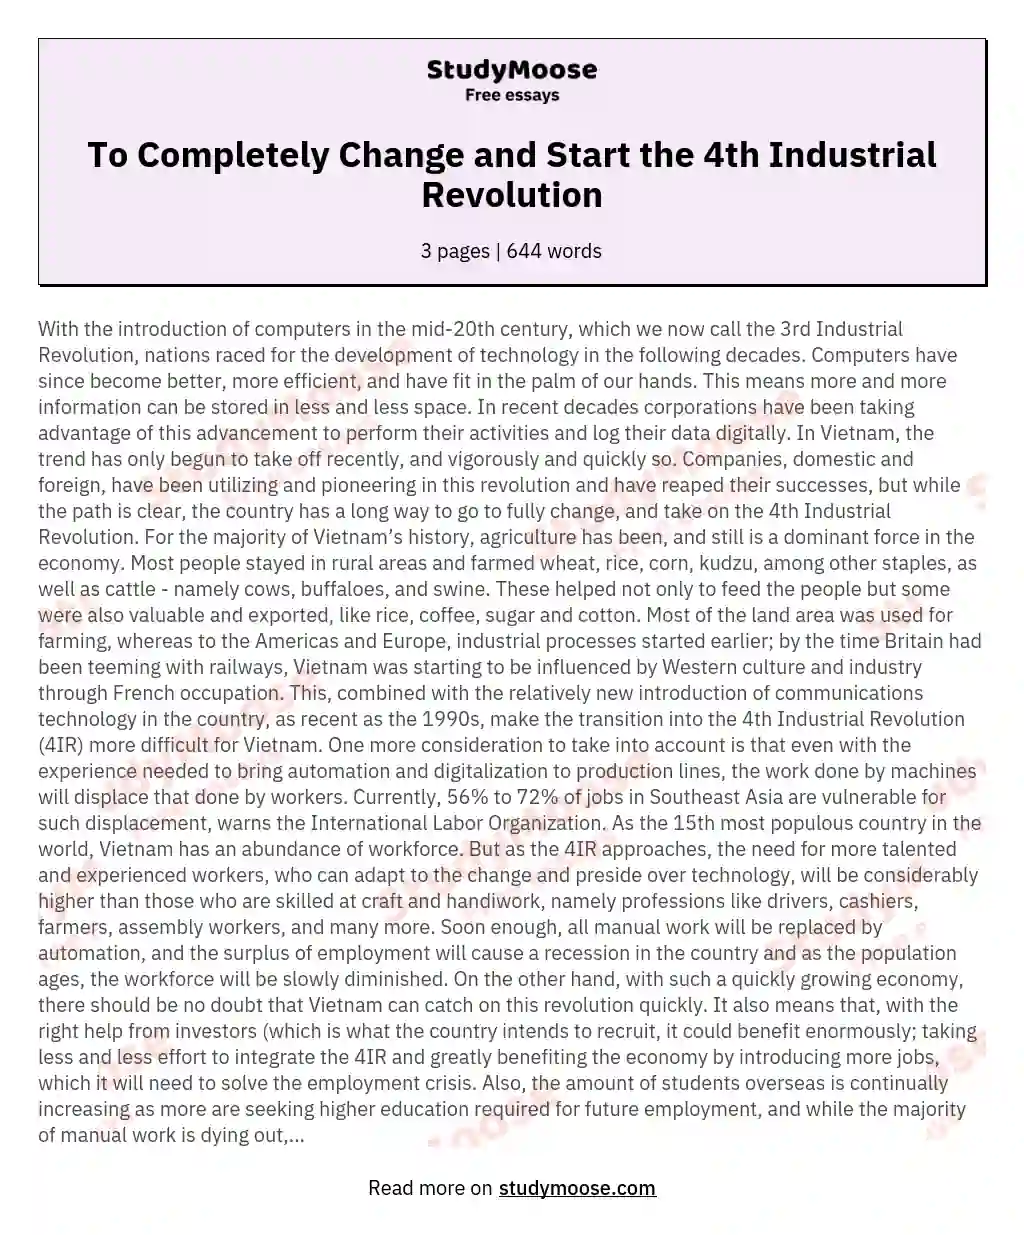 To Completely Change and Start the 4th Industrial Revolution essay